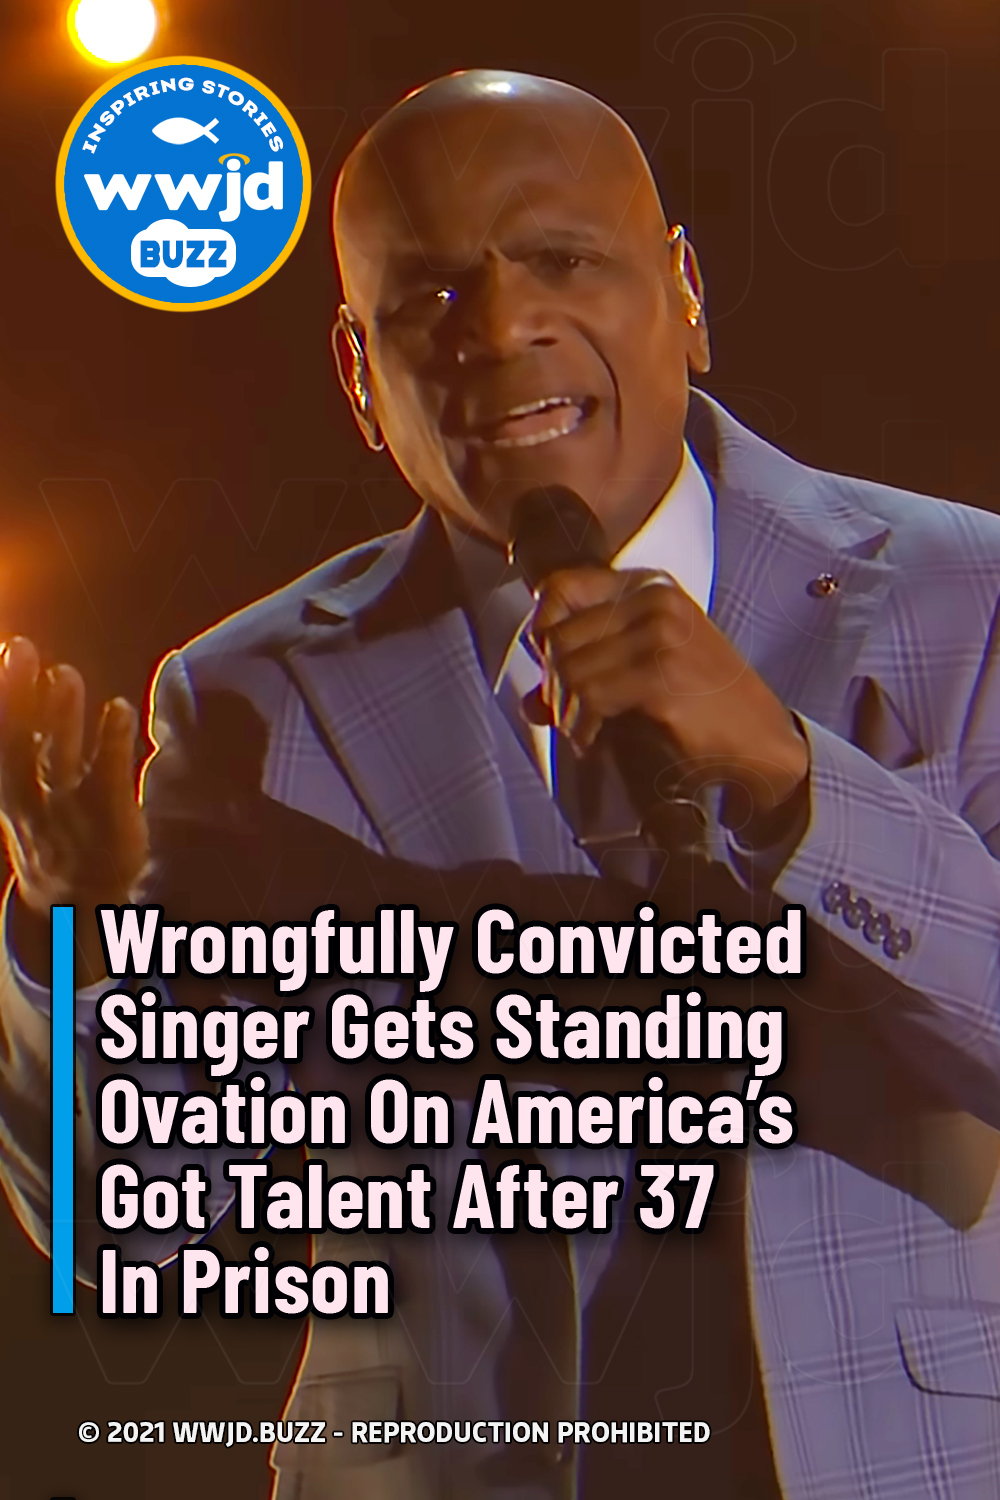 Wrongfully Convicted Singer Gets Standing Ovation On America’s Got Talent After 37 In Prison